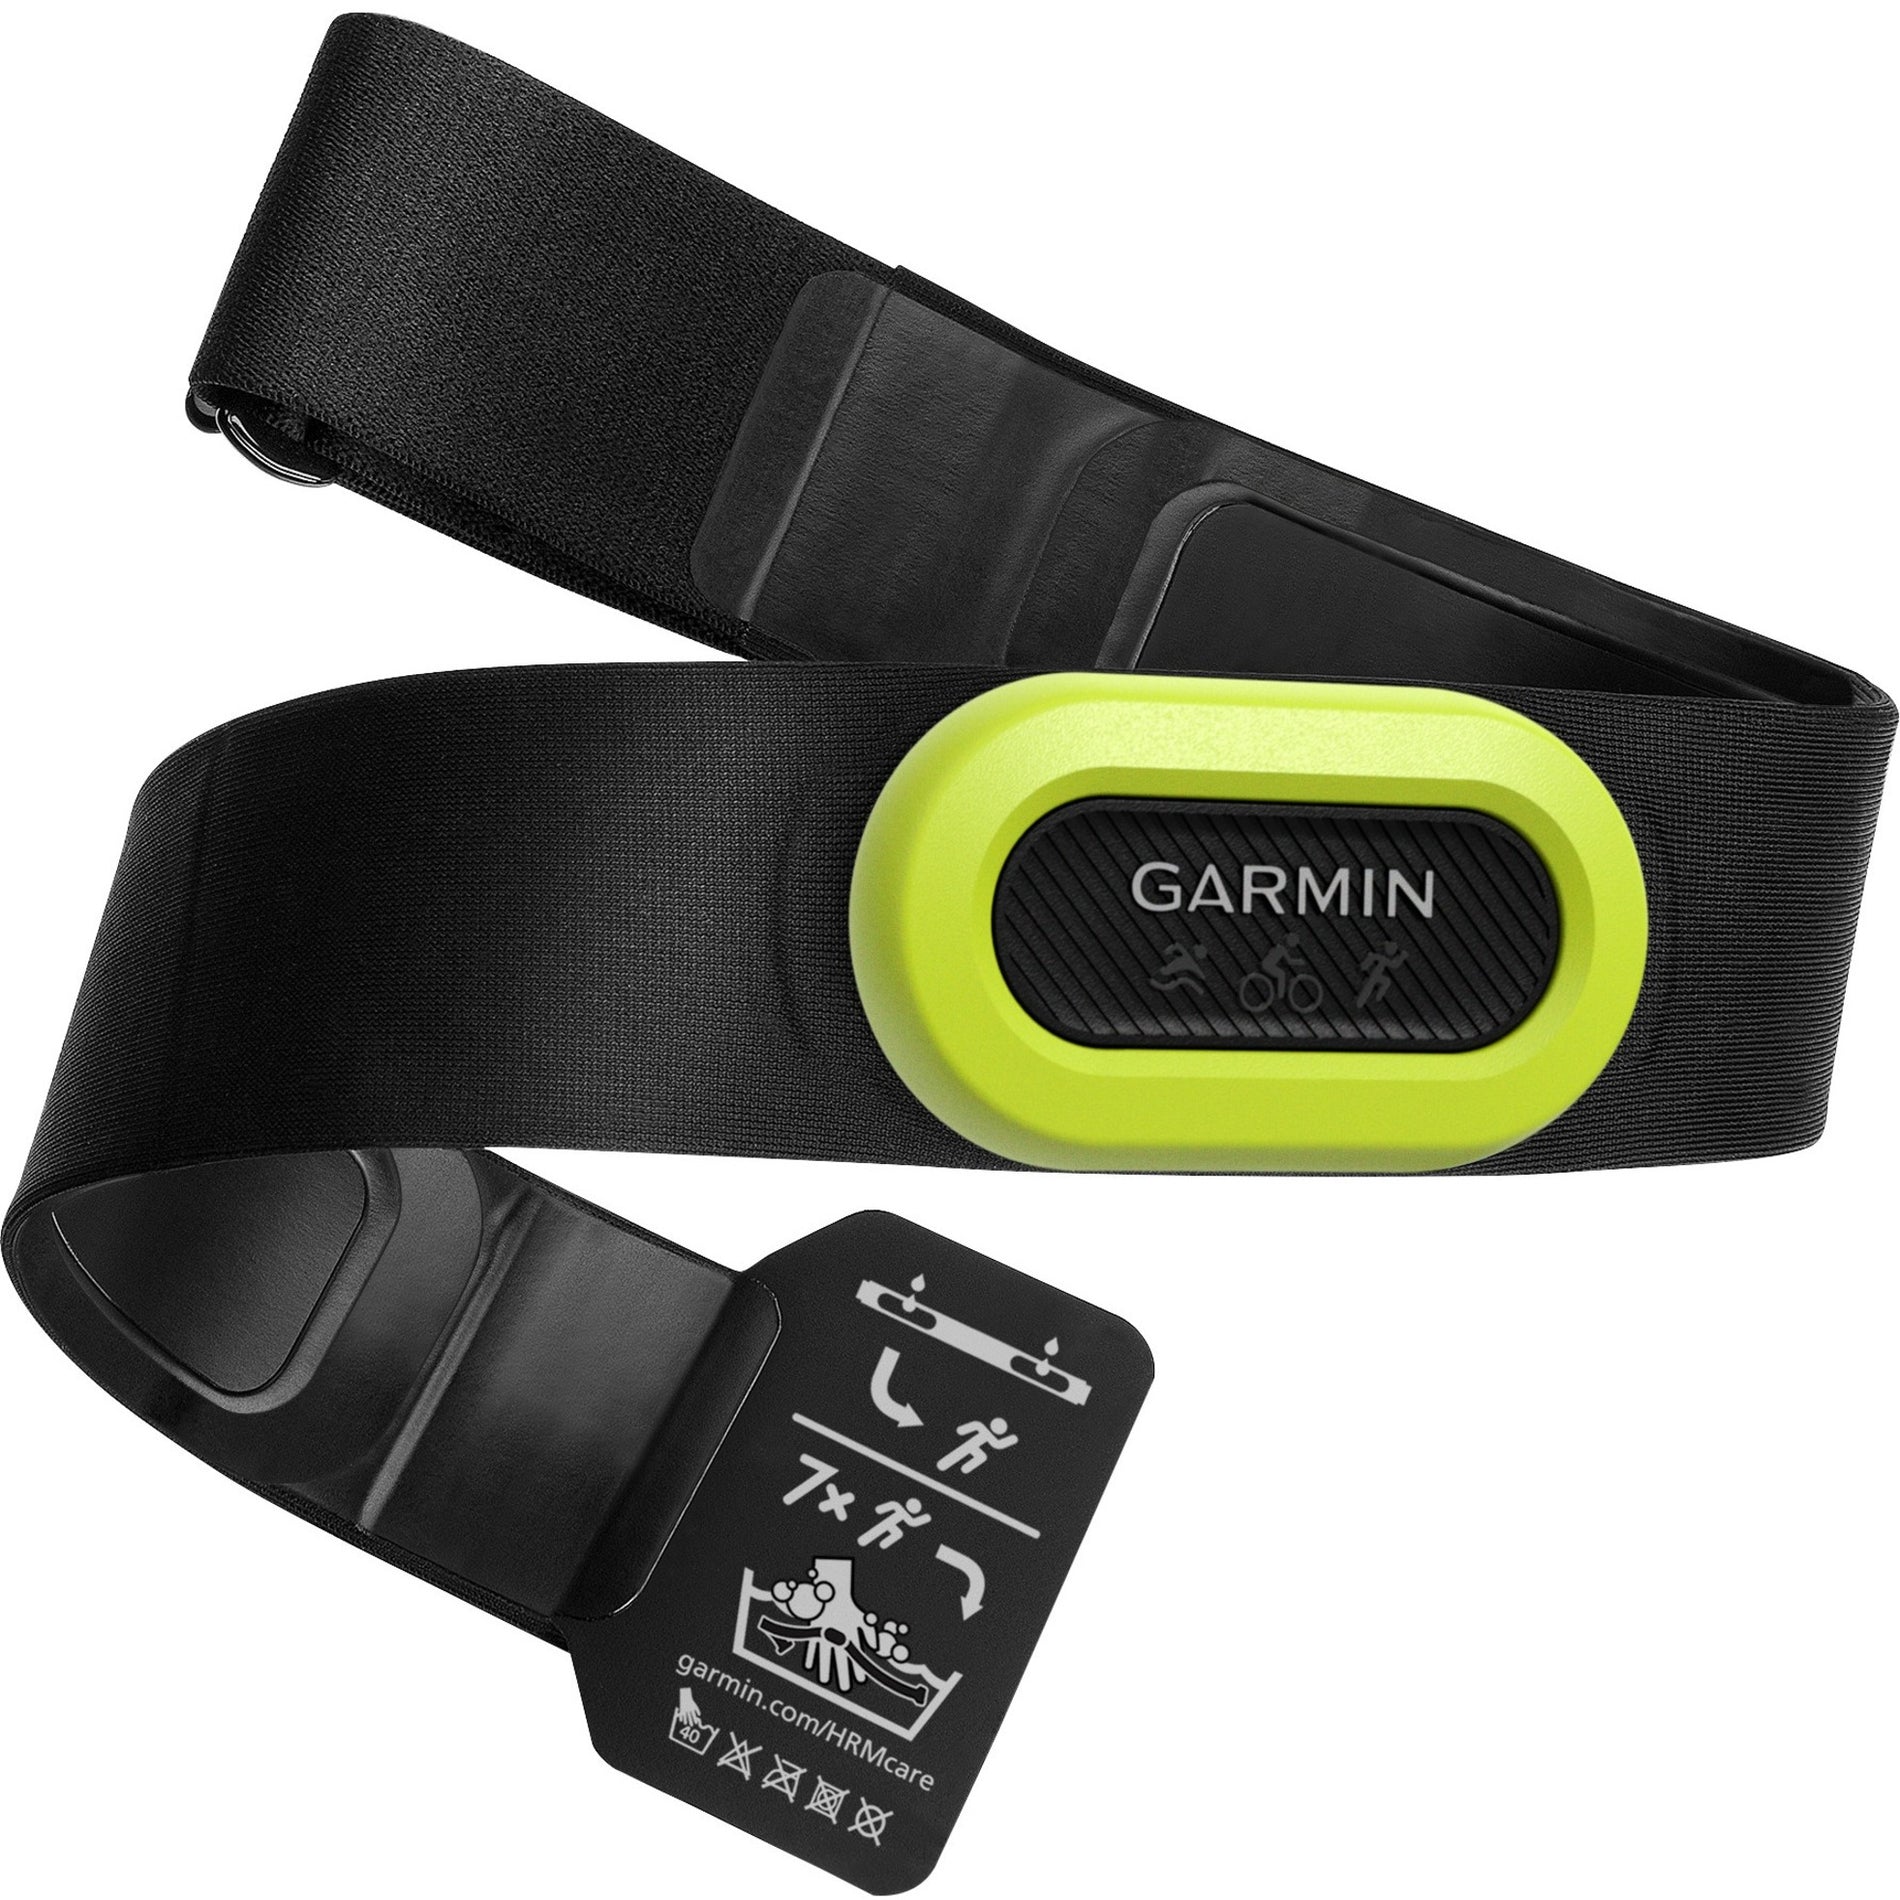 Garmin 010-12955-00 HRM-Pro Smart Activity Tracker, Water Resistant, Running, Tracking, Gym, Swimming [Discontinued]